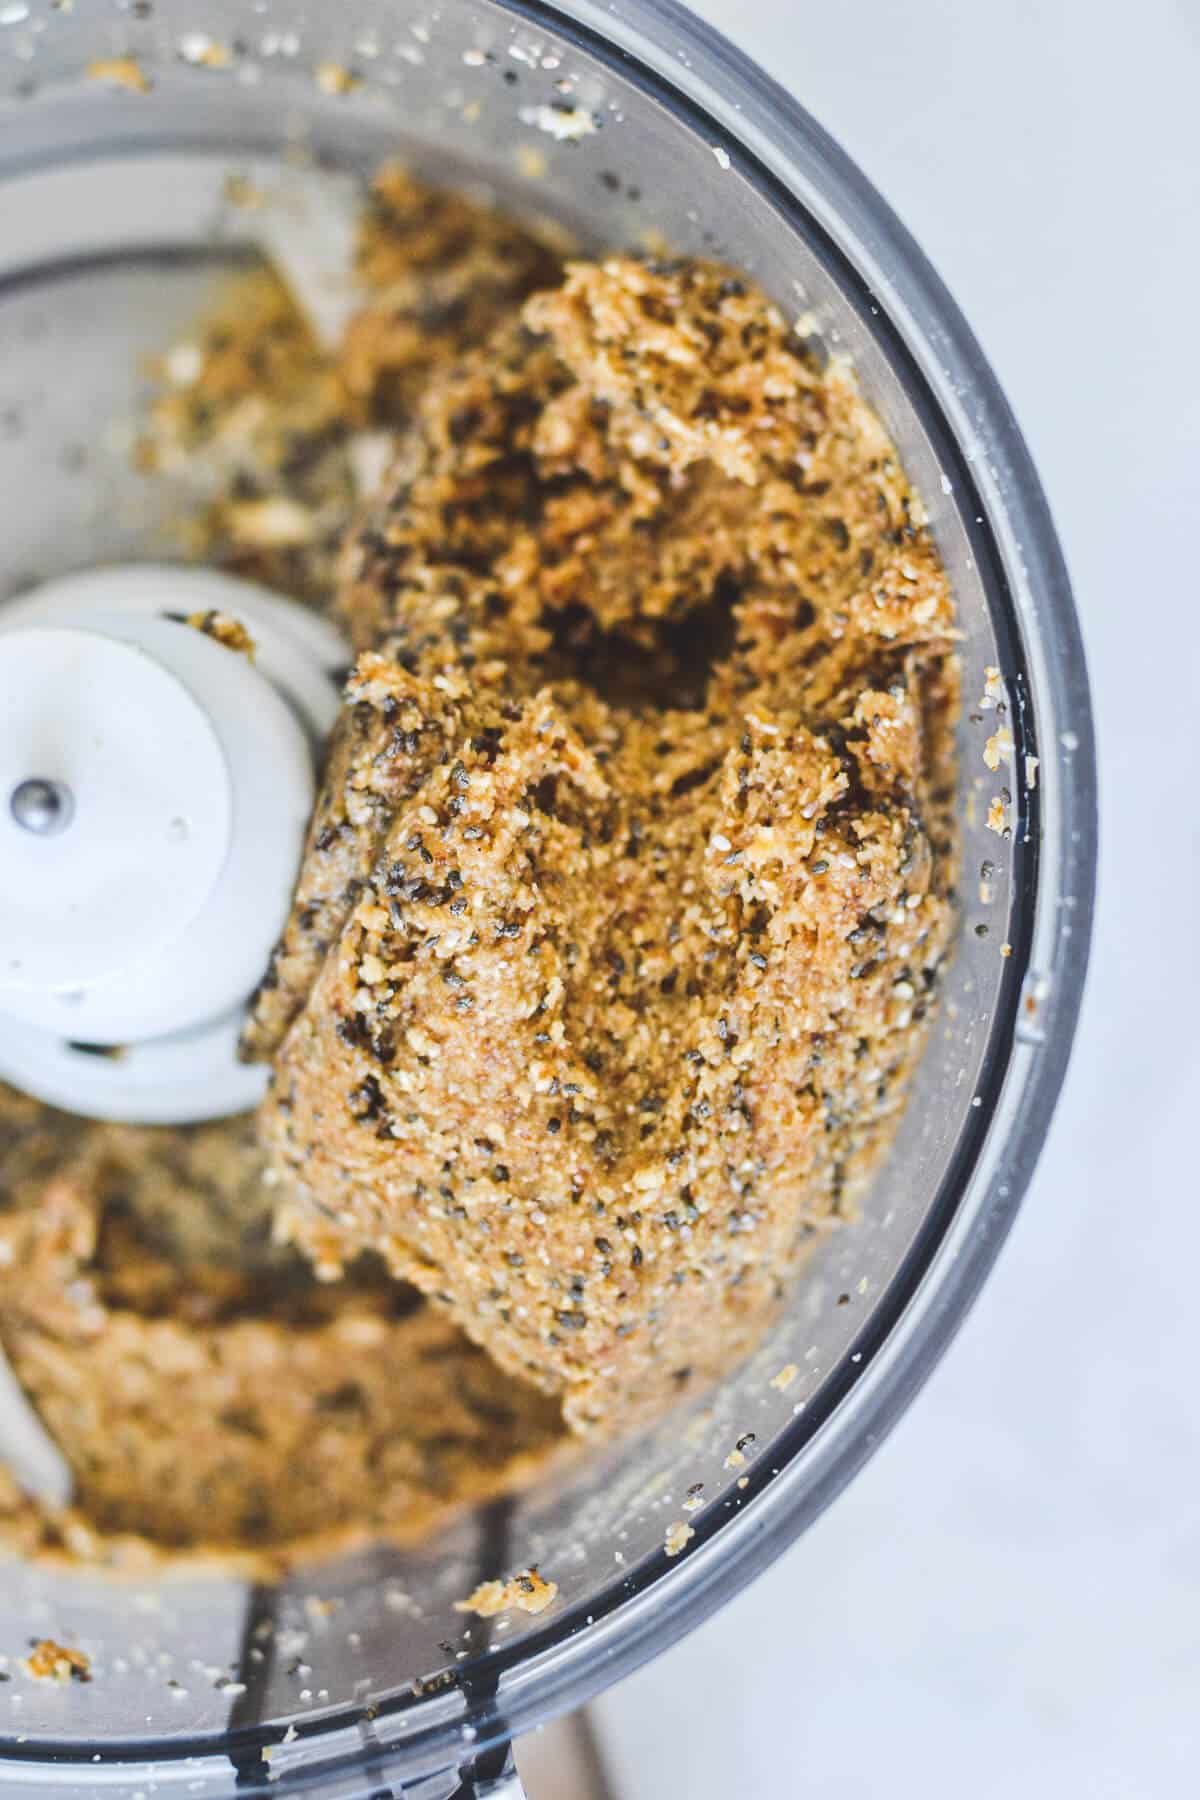 blended bliss ball mixture in a food processor